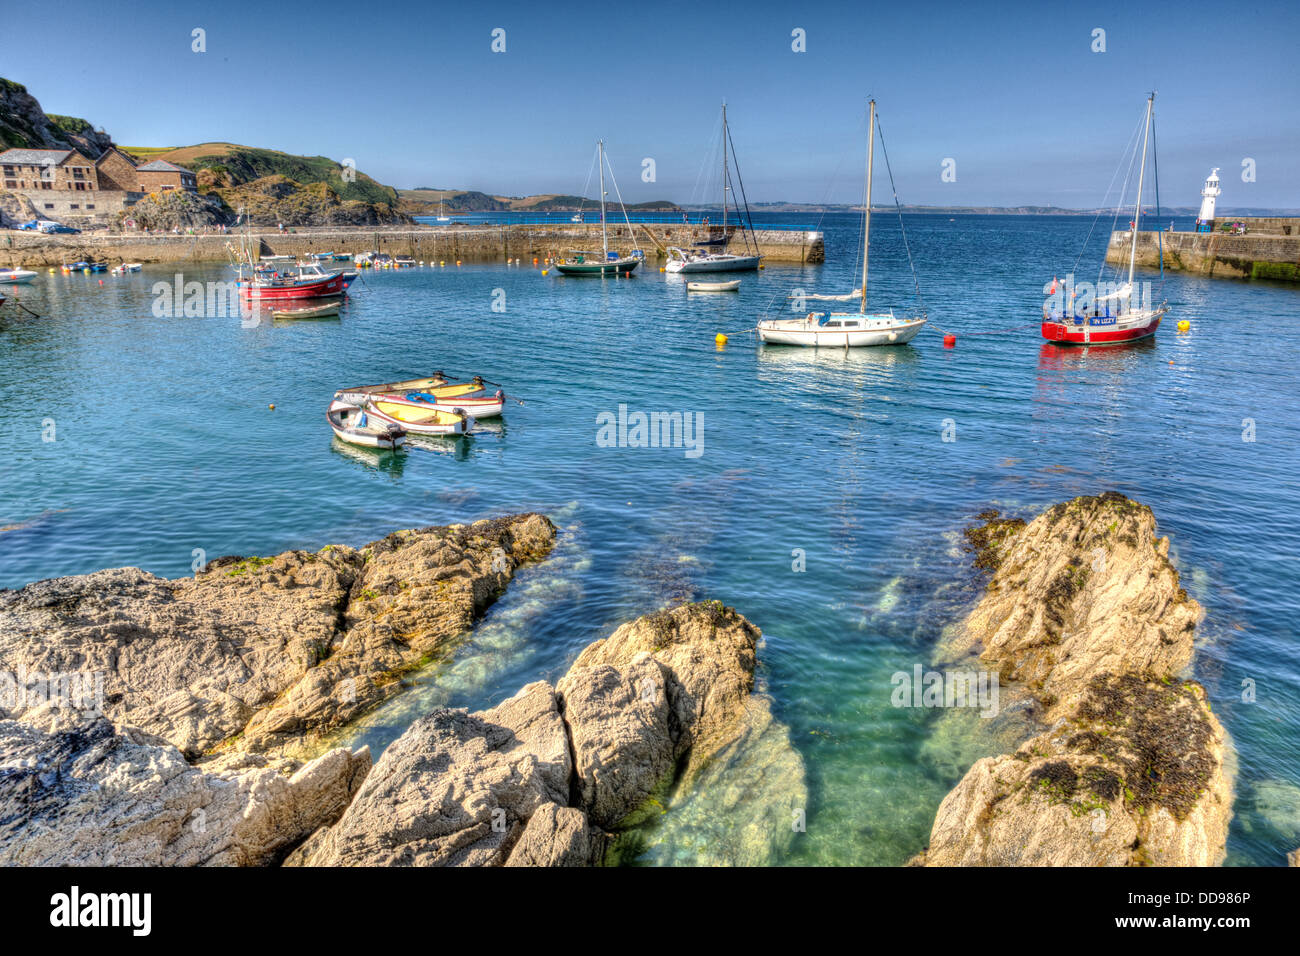 Boats and yachts in harbour Mevagissey Cornwall blue sea and sky in HDR Stock Photo